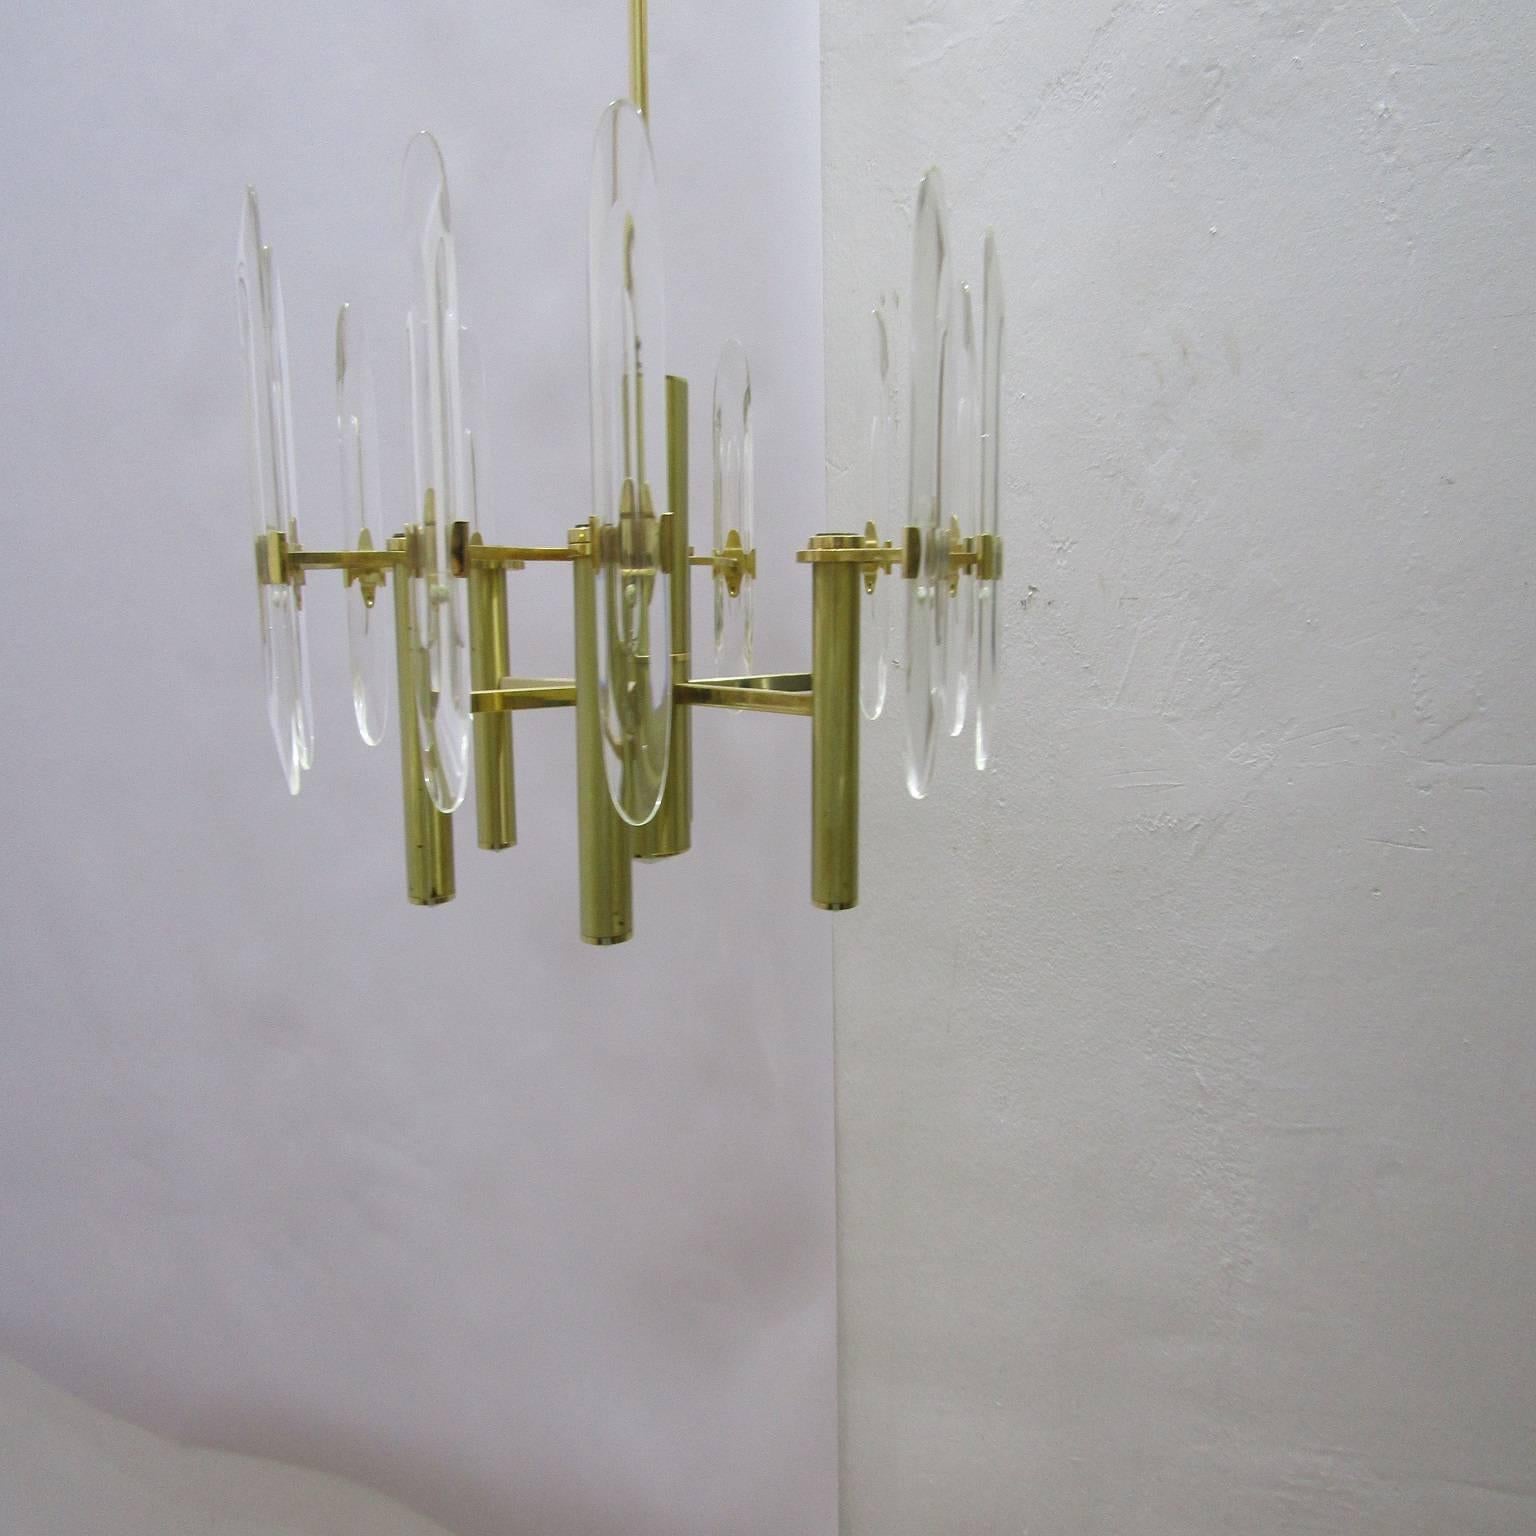 Gaetano Sciolari gold-plated chandelier six lights, the second half of the 20th century chandelier in excellent condition with removable crystals.